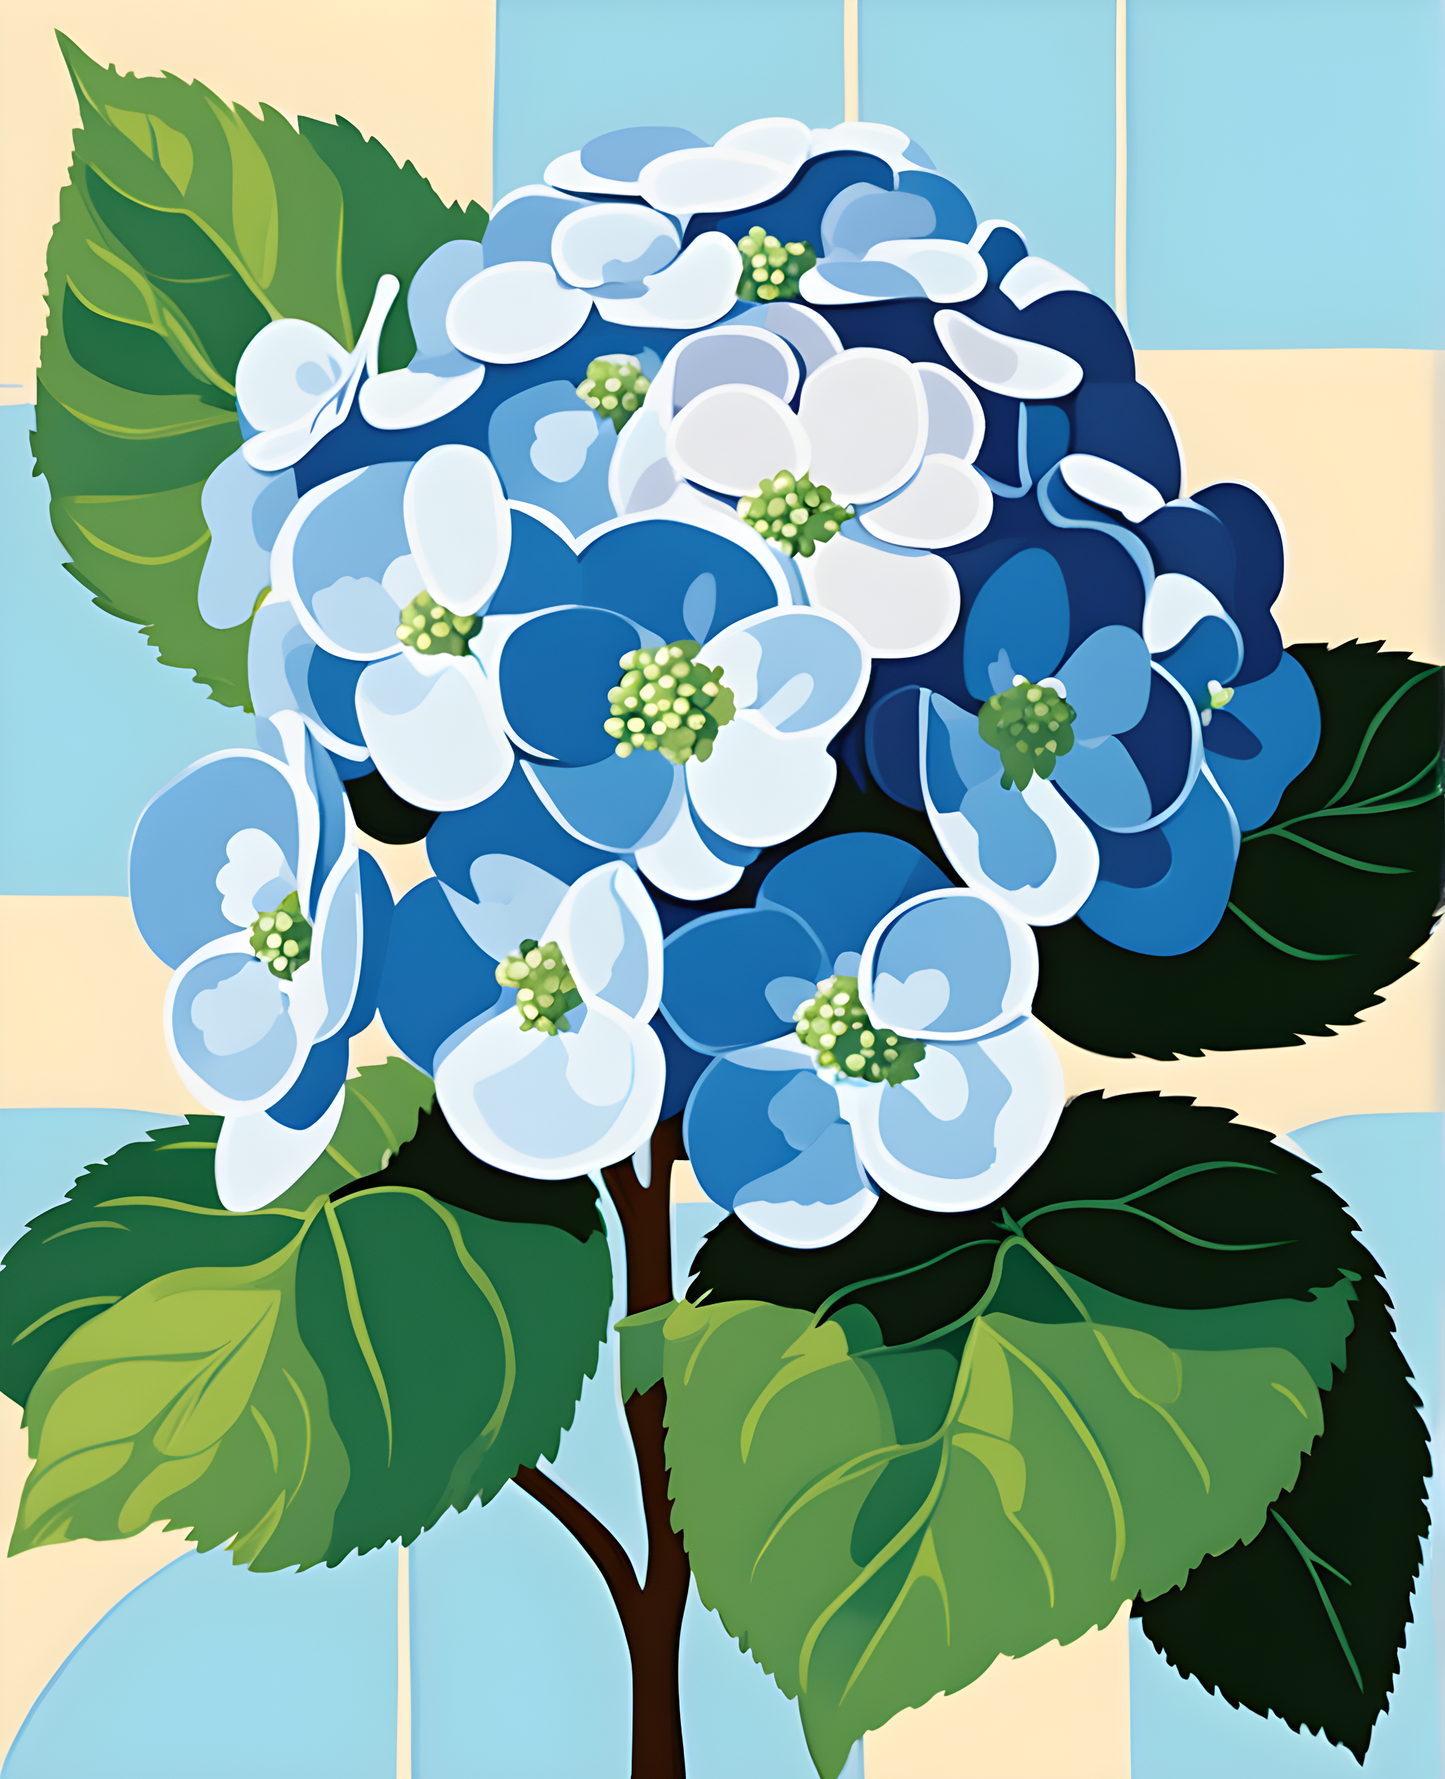 Flowers Collection OD (6) - Hydrangea - Van-Go Paint-By-Number Kit